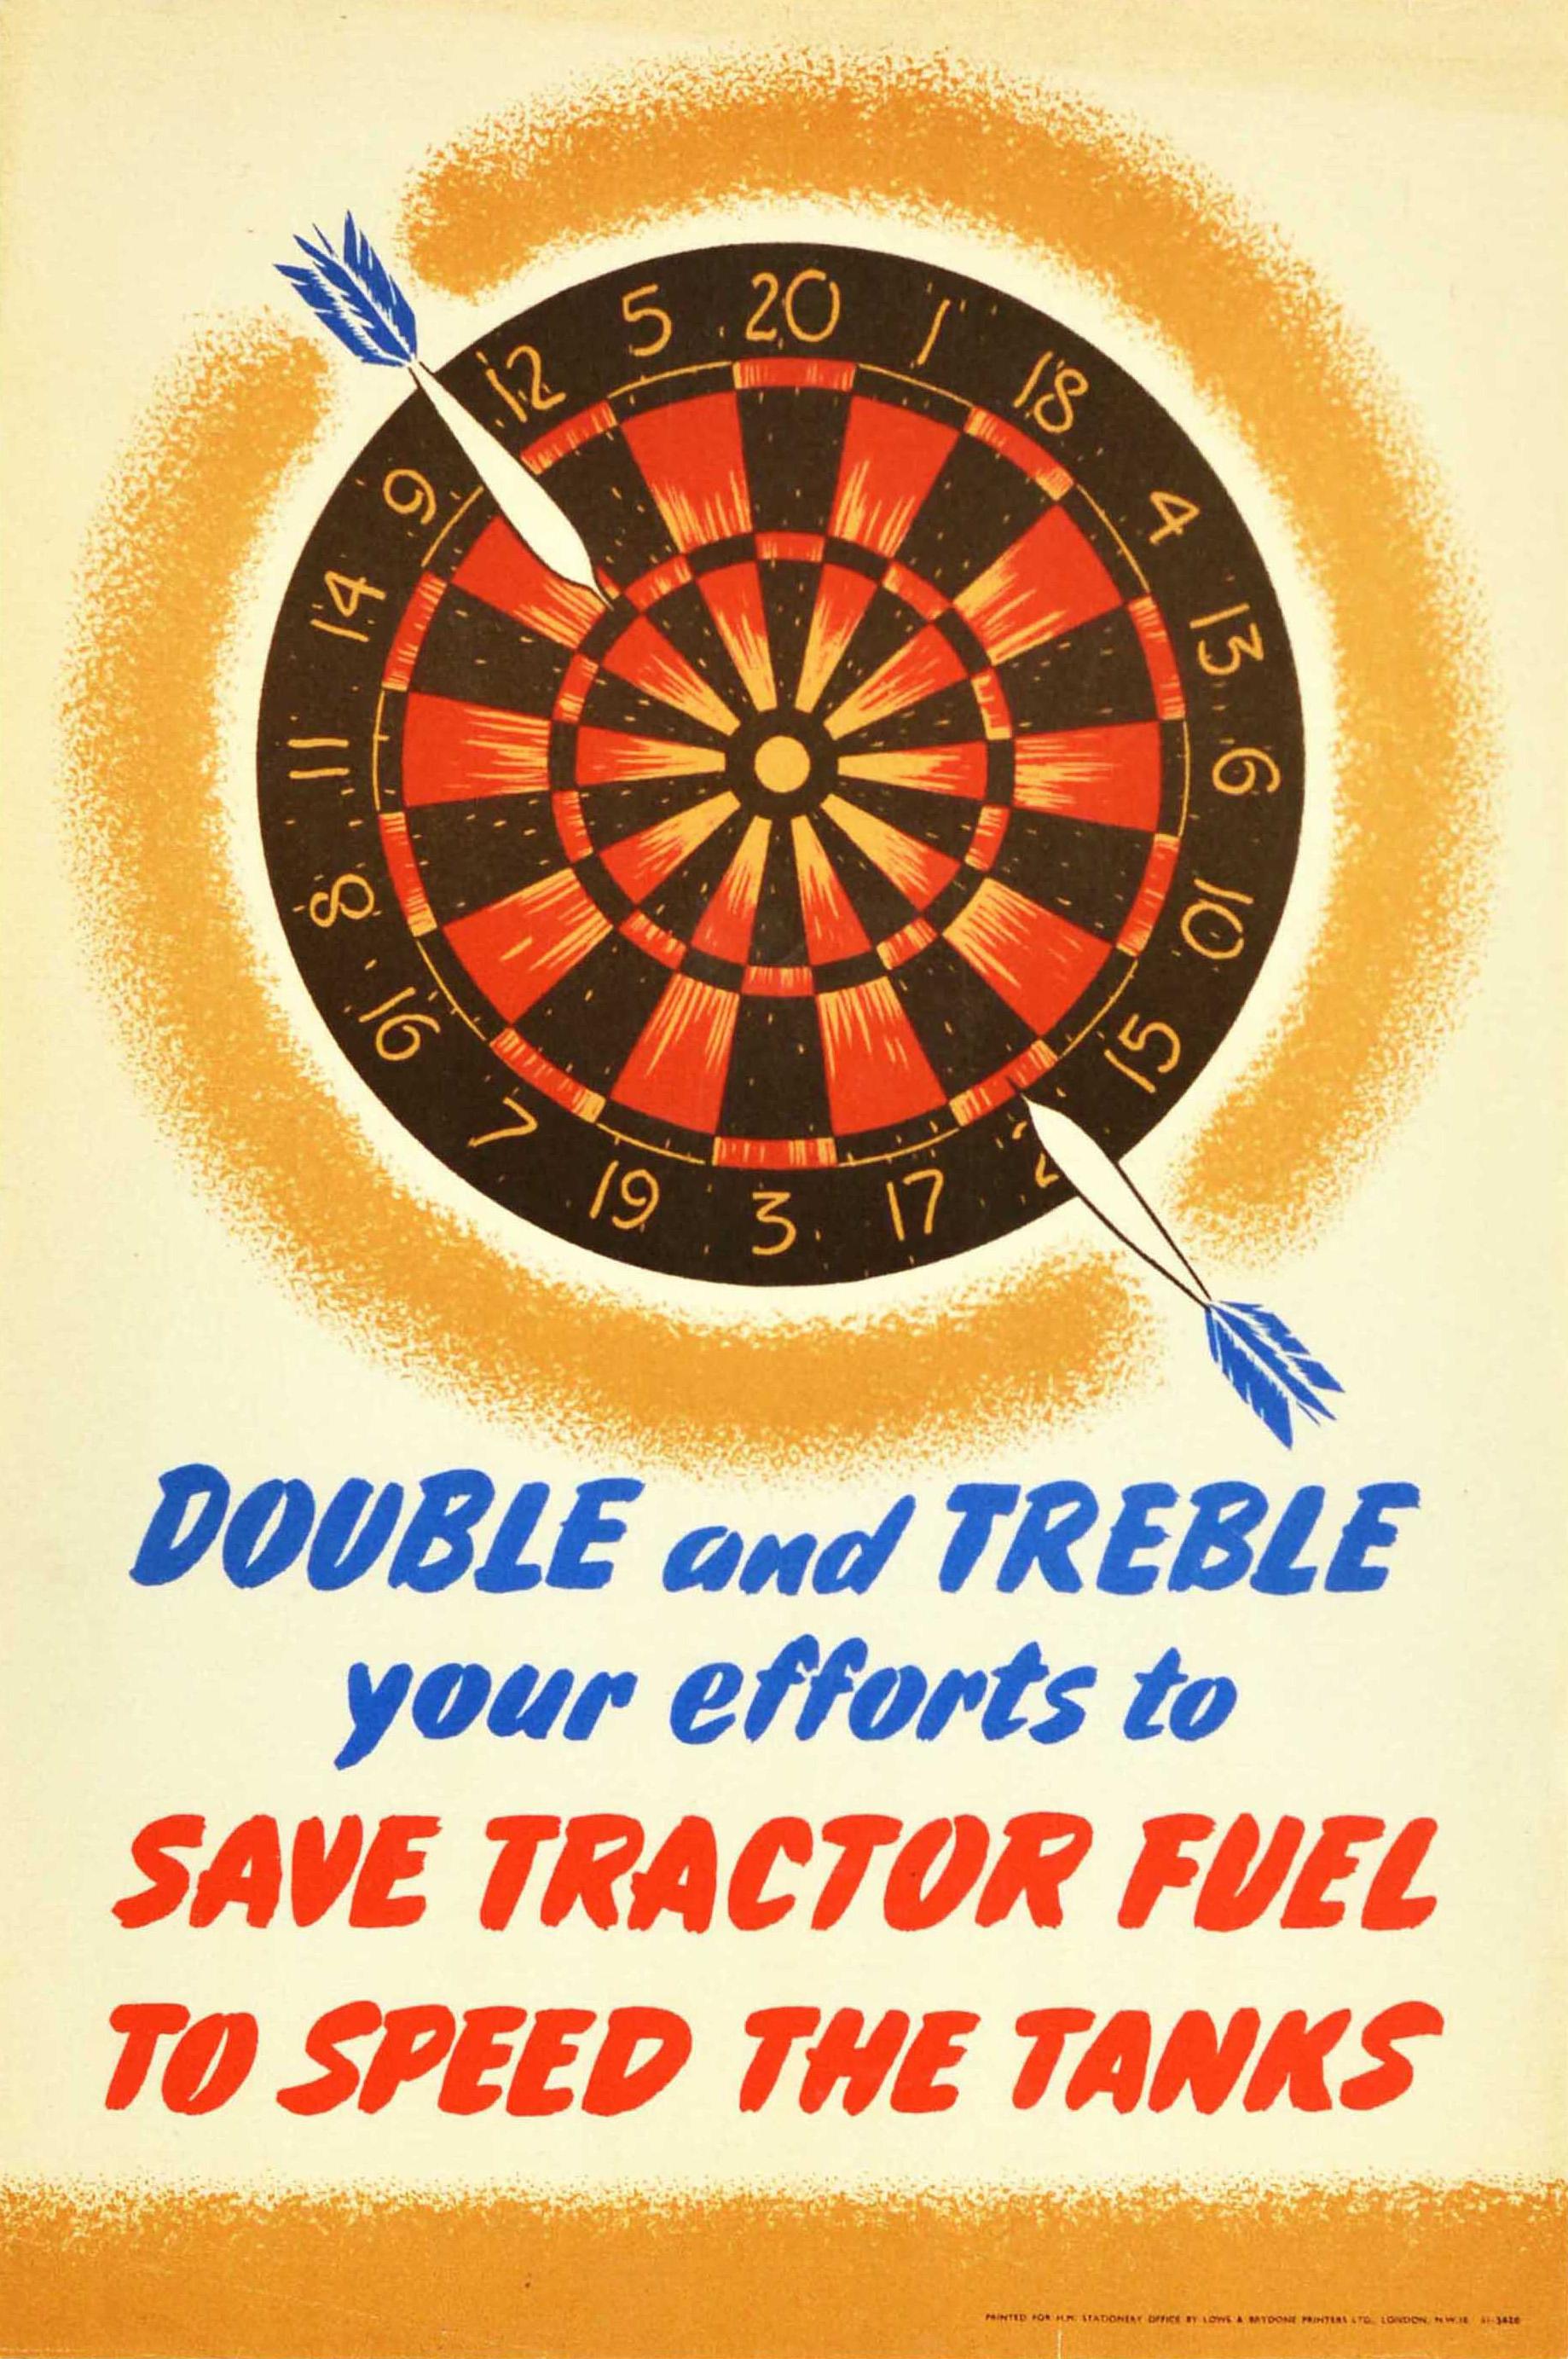 Unknown Print - Original Vintage WWII Poster Save Tractor Fuel To Speed The Tanks Darts Design